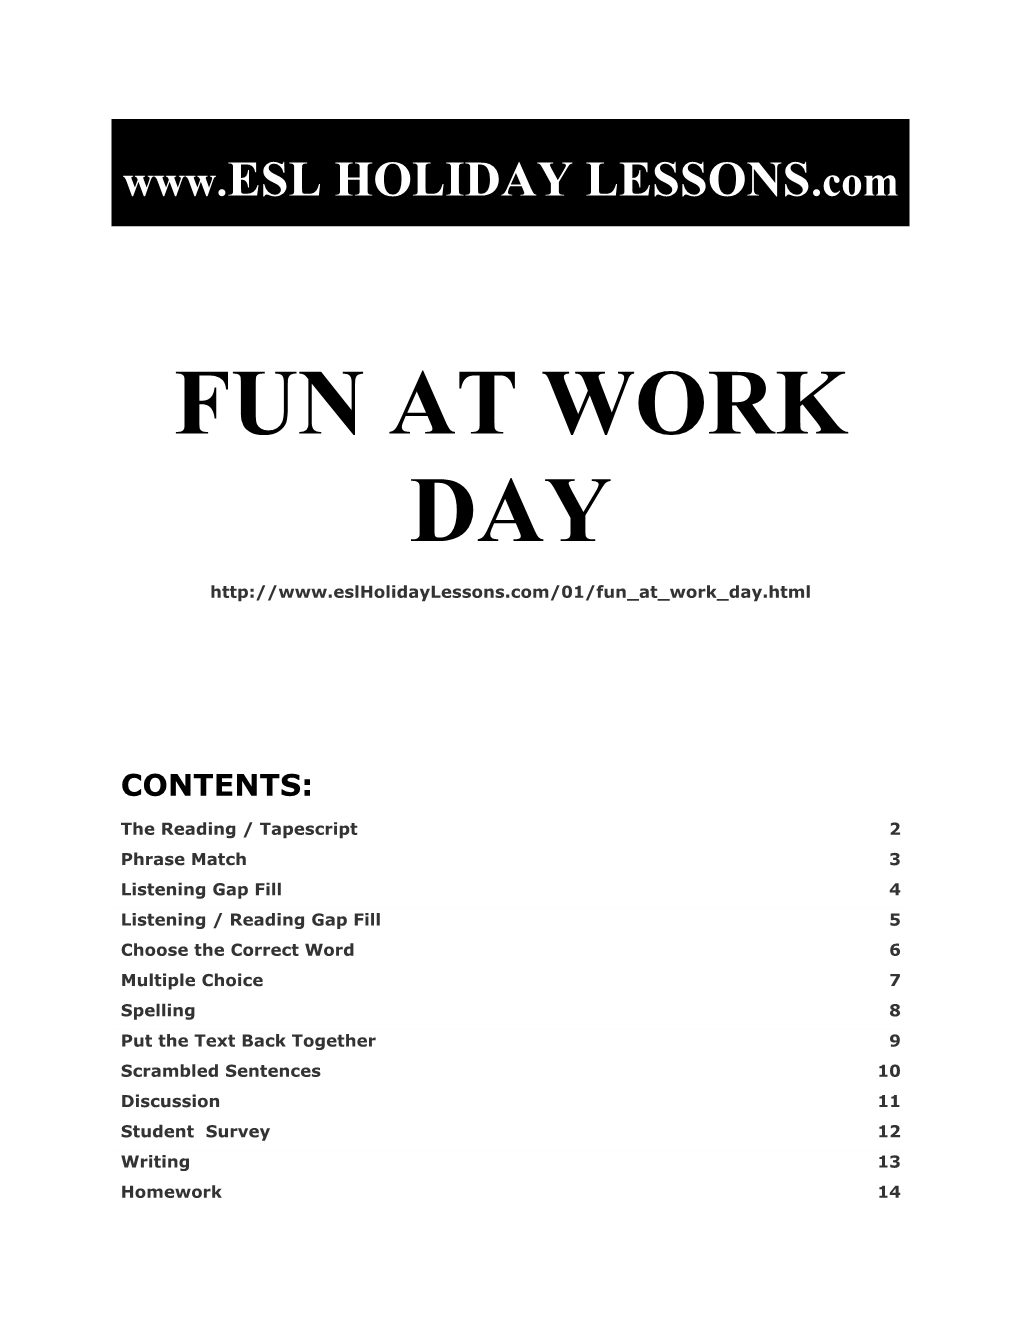 Holiday Lessons - Fun at Work Day